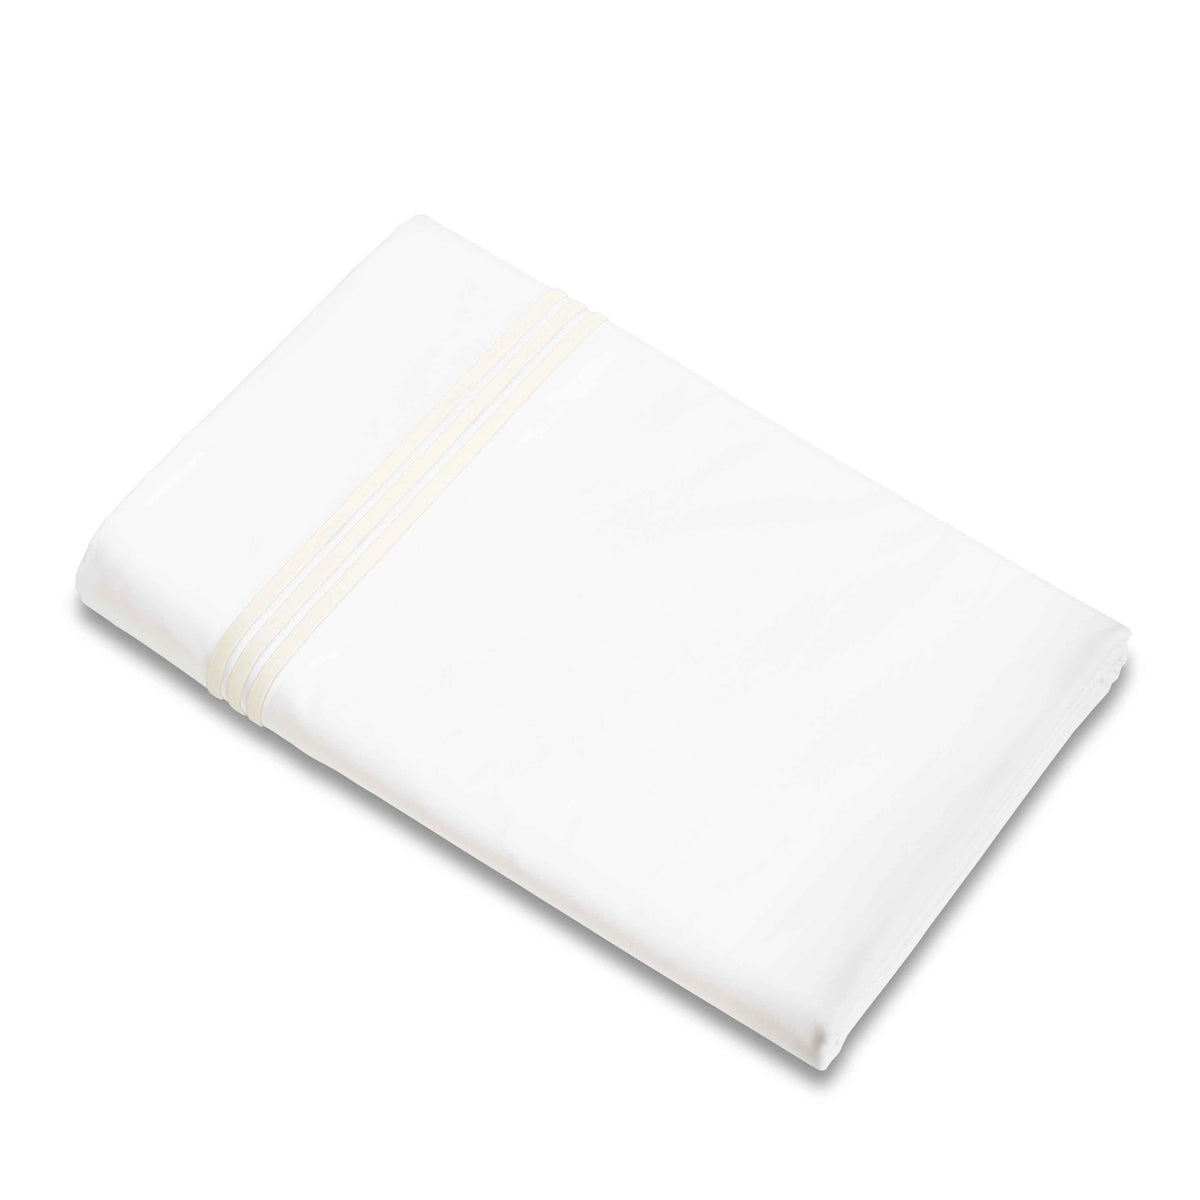 Flat Sheet of Signoria Platinum Percale Bedding in White/Ivory Color